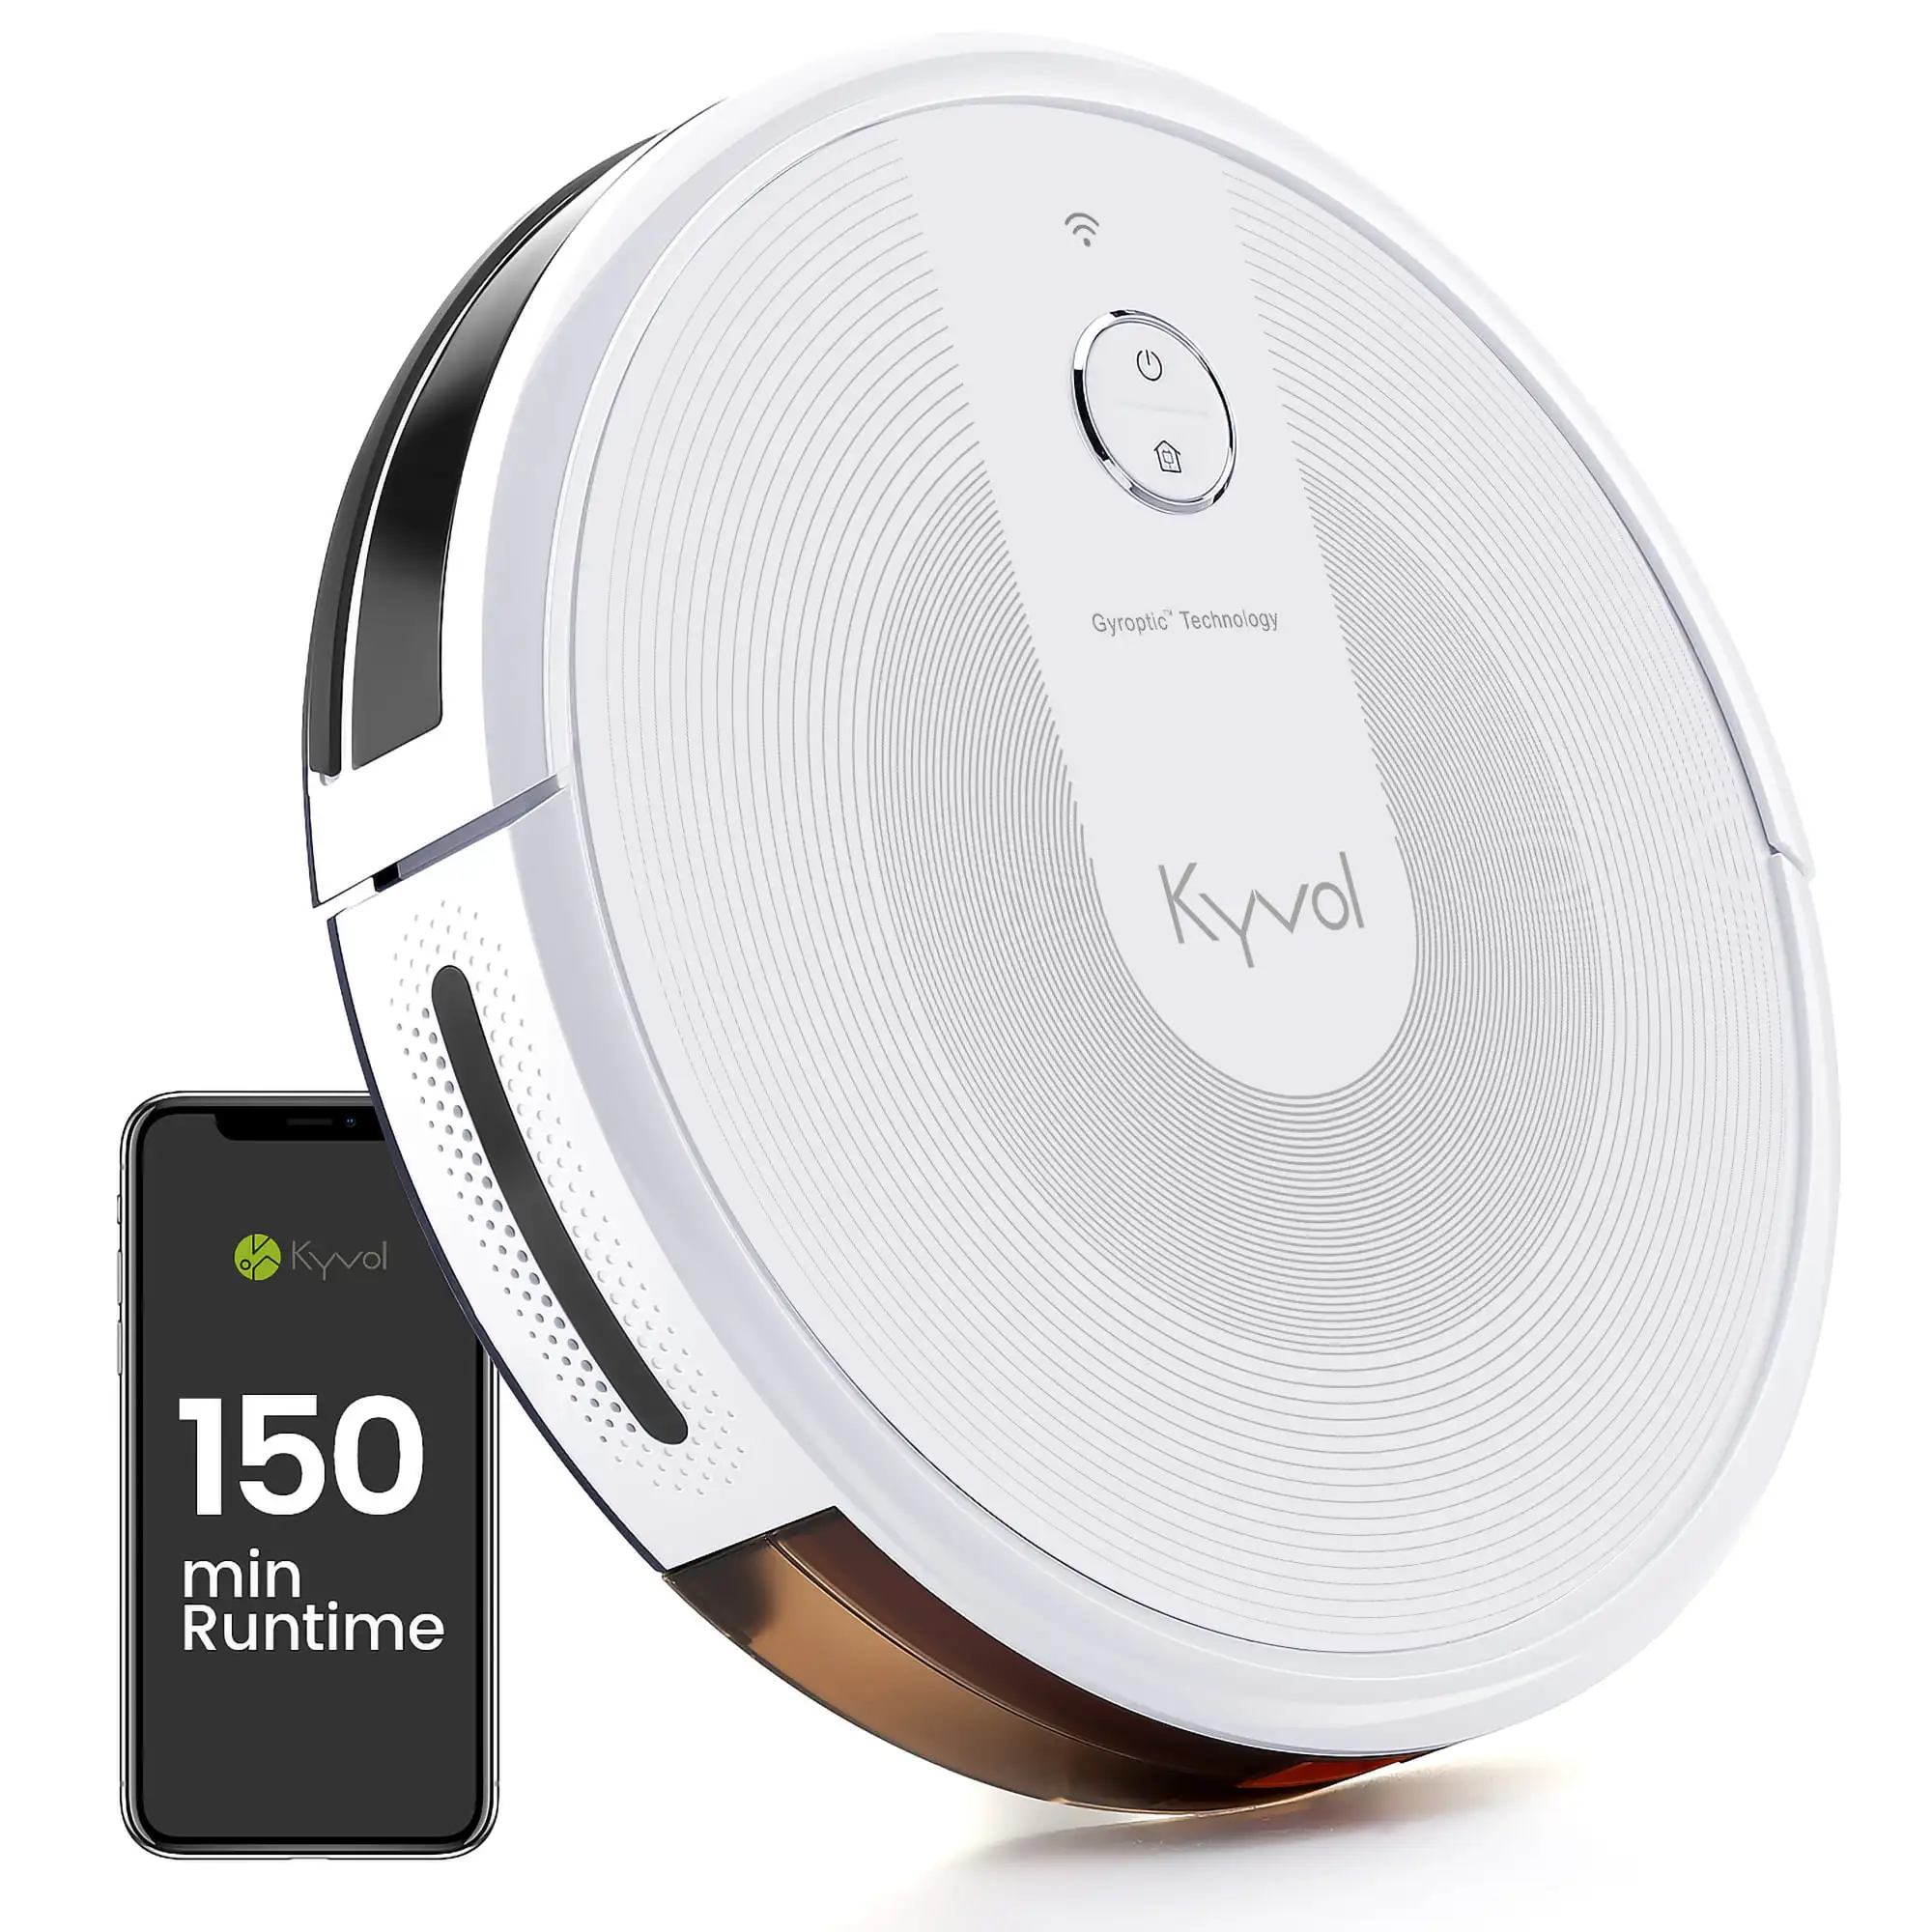 

Delivery within 7-10 daysHuanQiu Cybovac E30 Robot Vacuum Cleaner White, 2200Pa Strong Suction, Robotic Vacuum Cleaner,150 mins